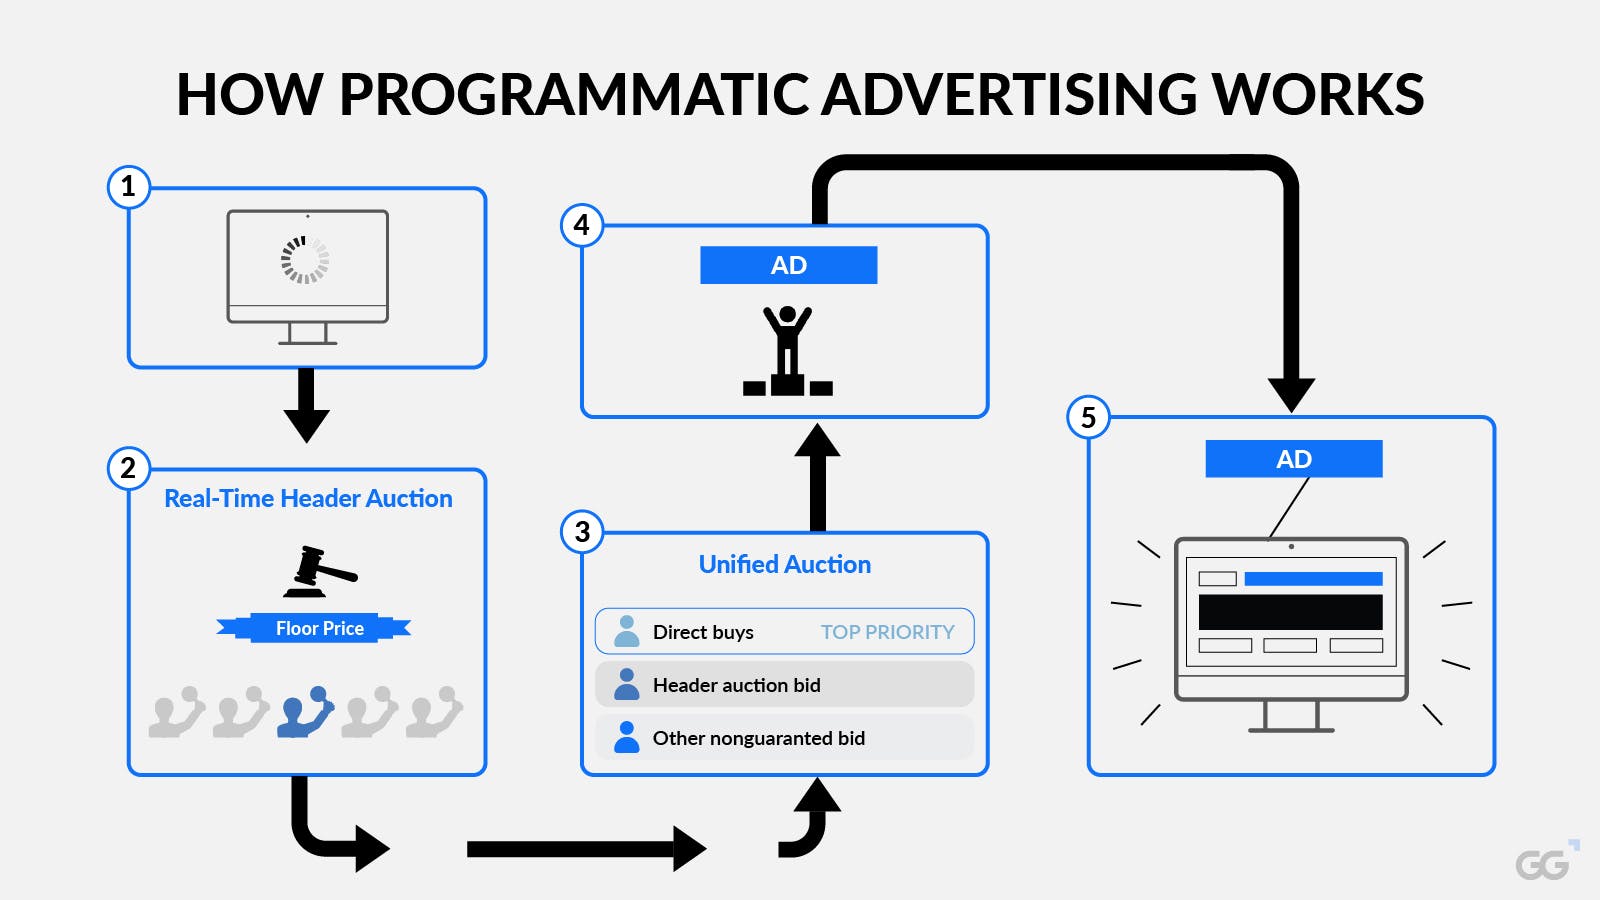 A visual representation of how programmatic advertising works, including data collection, real-time bidding header auction, unified auction, ad creation, ad delivery.